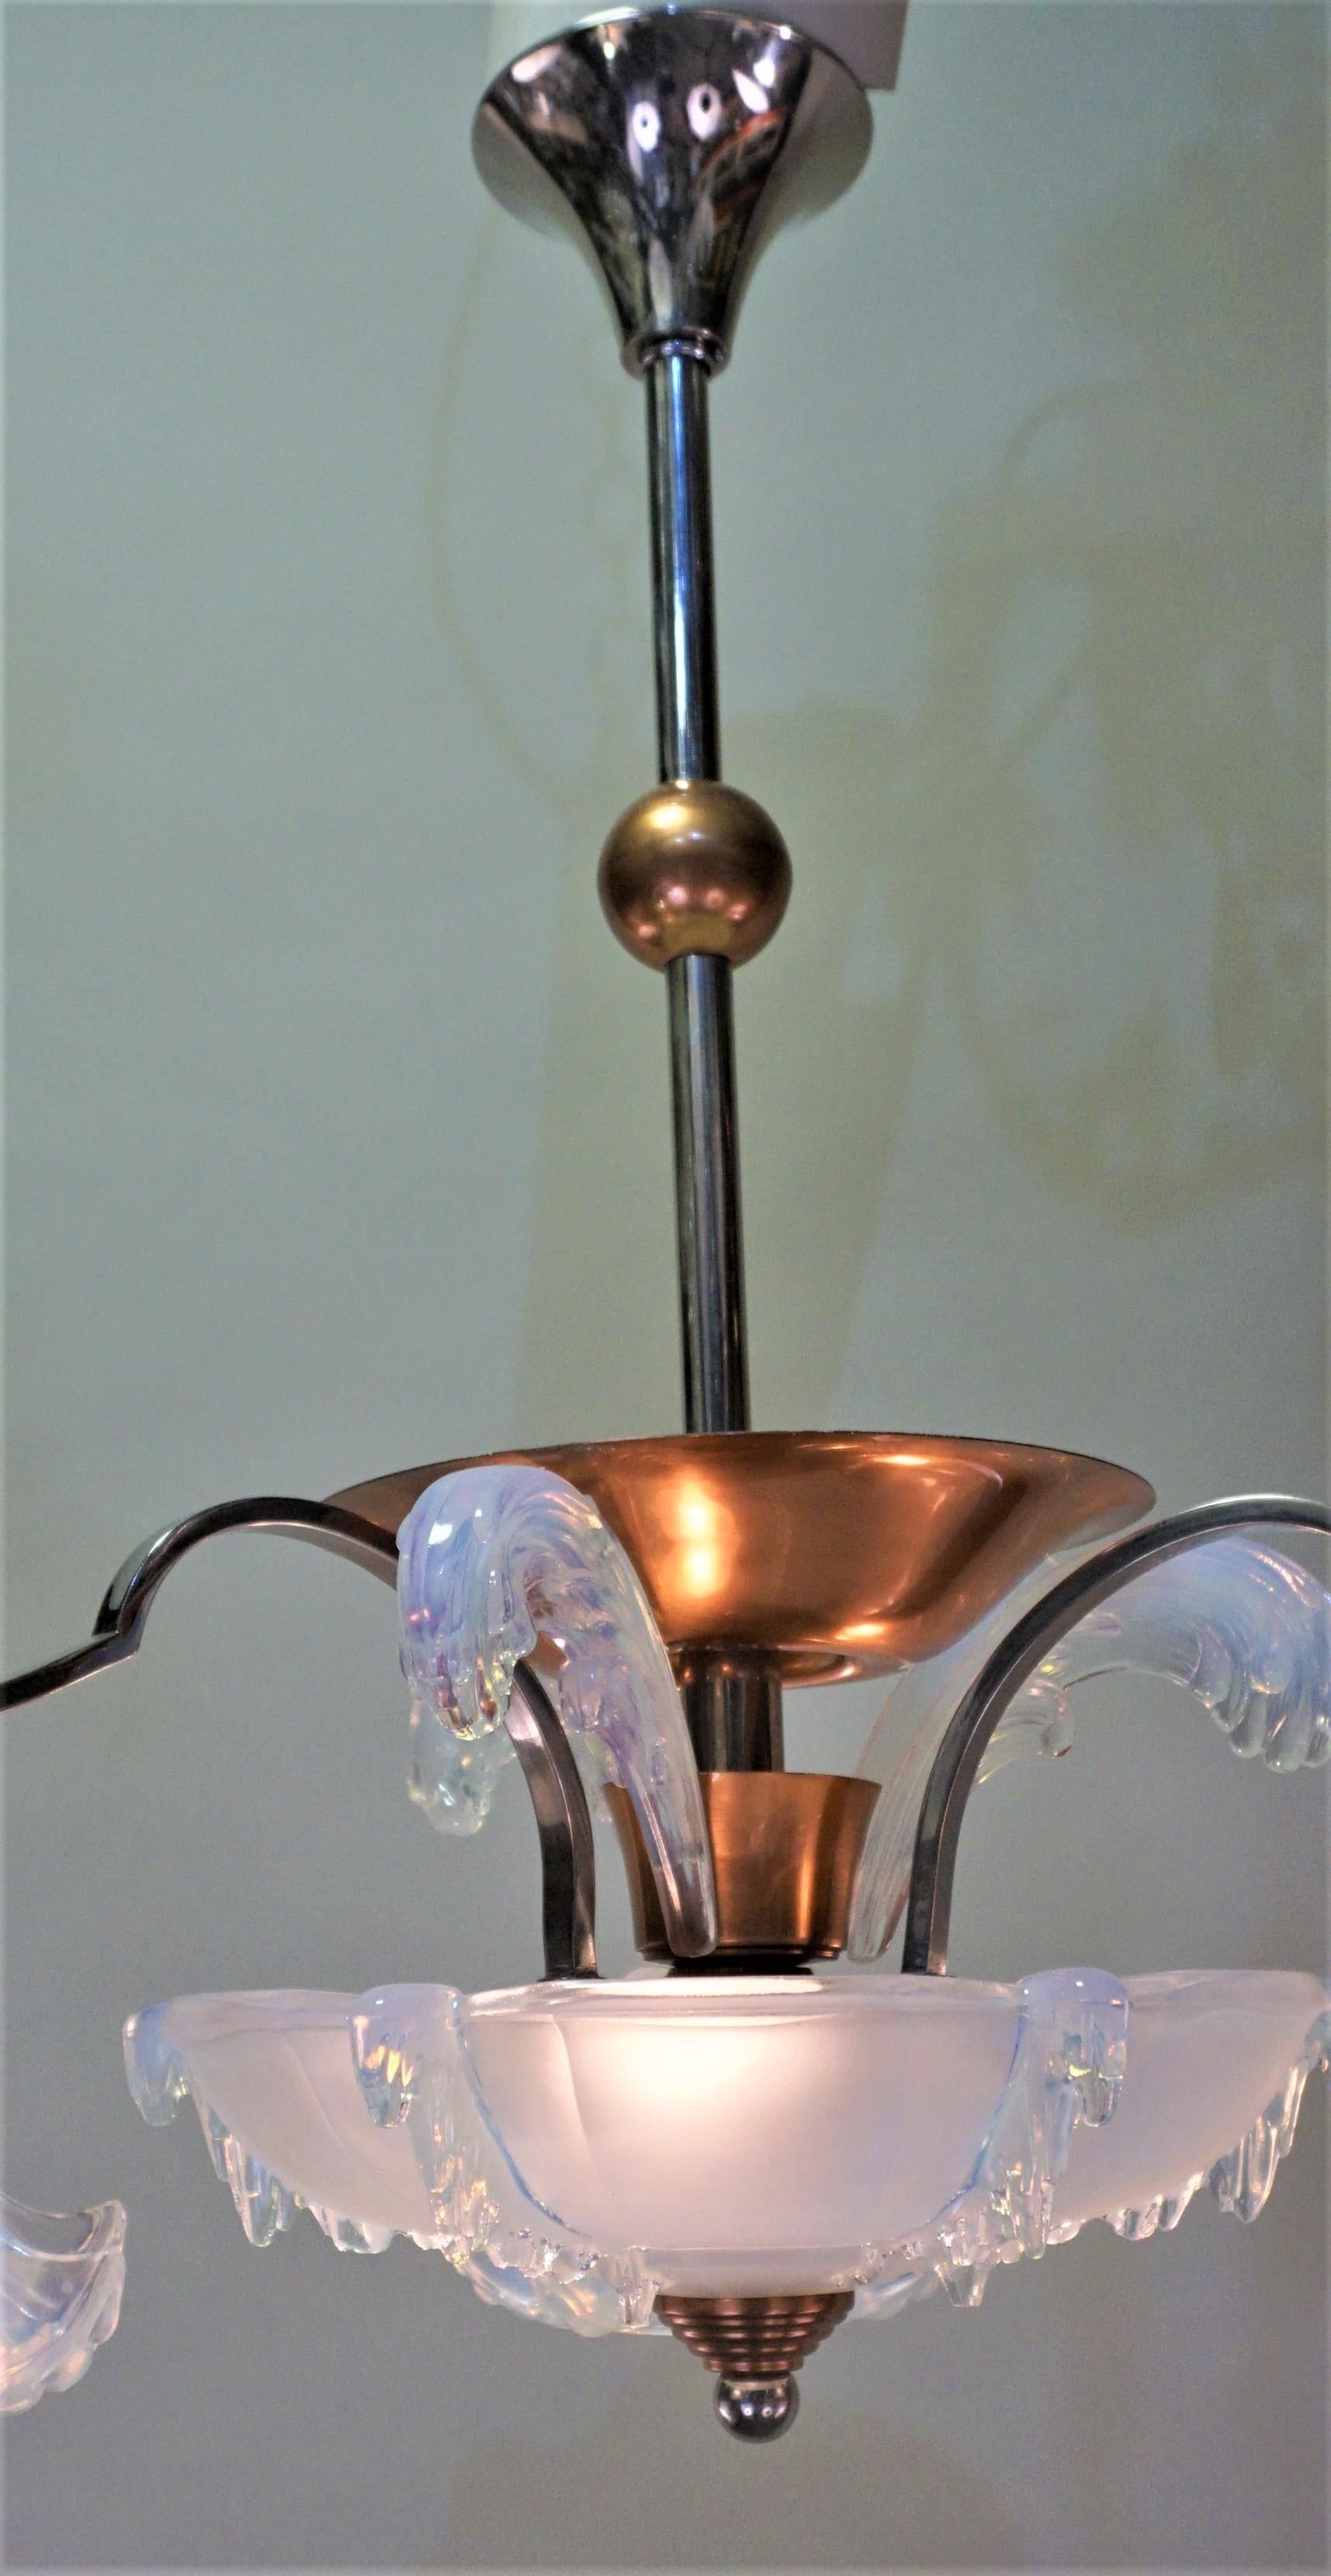 Mid-20th Century French 1930s Art Deco Chandelier with Opaline Glass Shades by Ezan